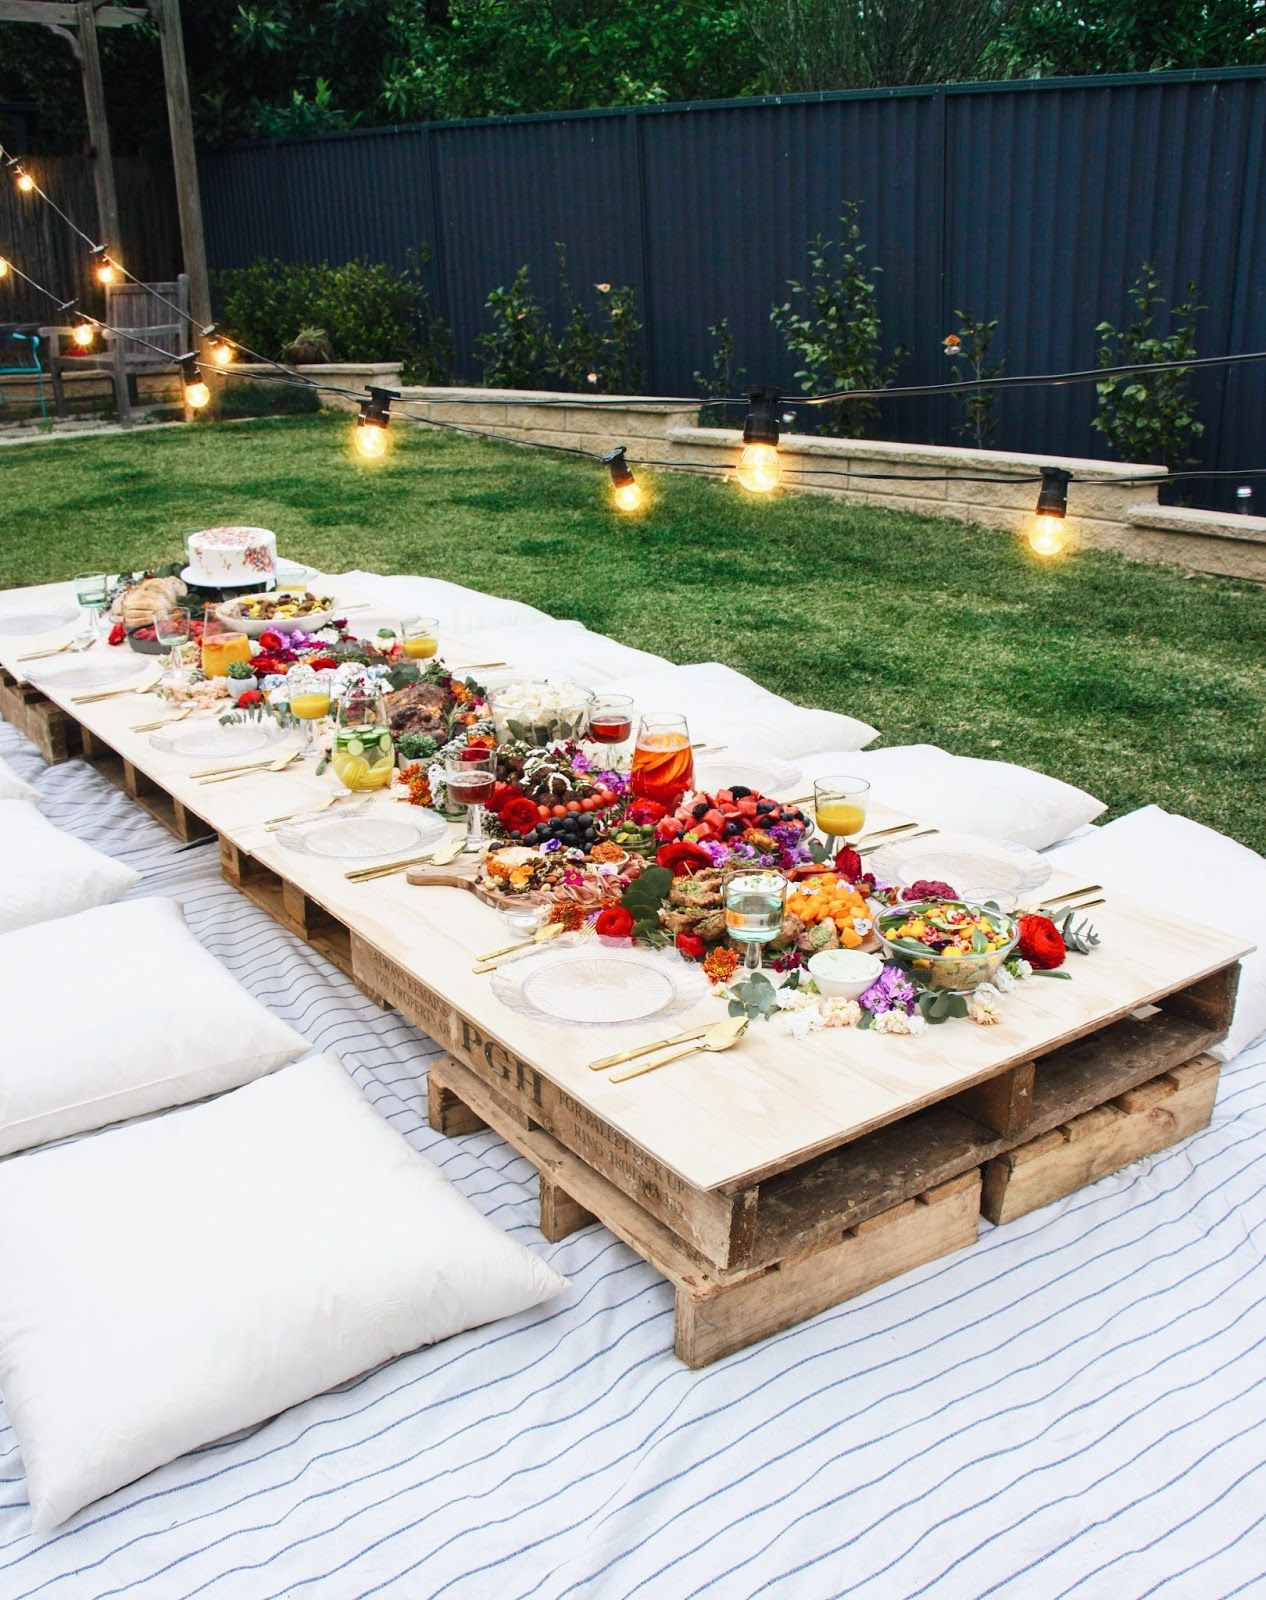 Backyard Picnic Party Ideas
 Must See Backyard Party Ideas for a Relaxing and Luxurious